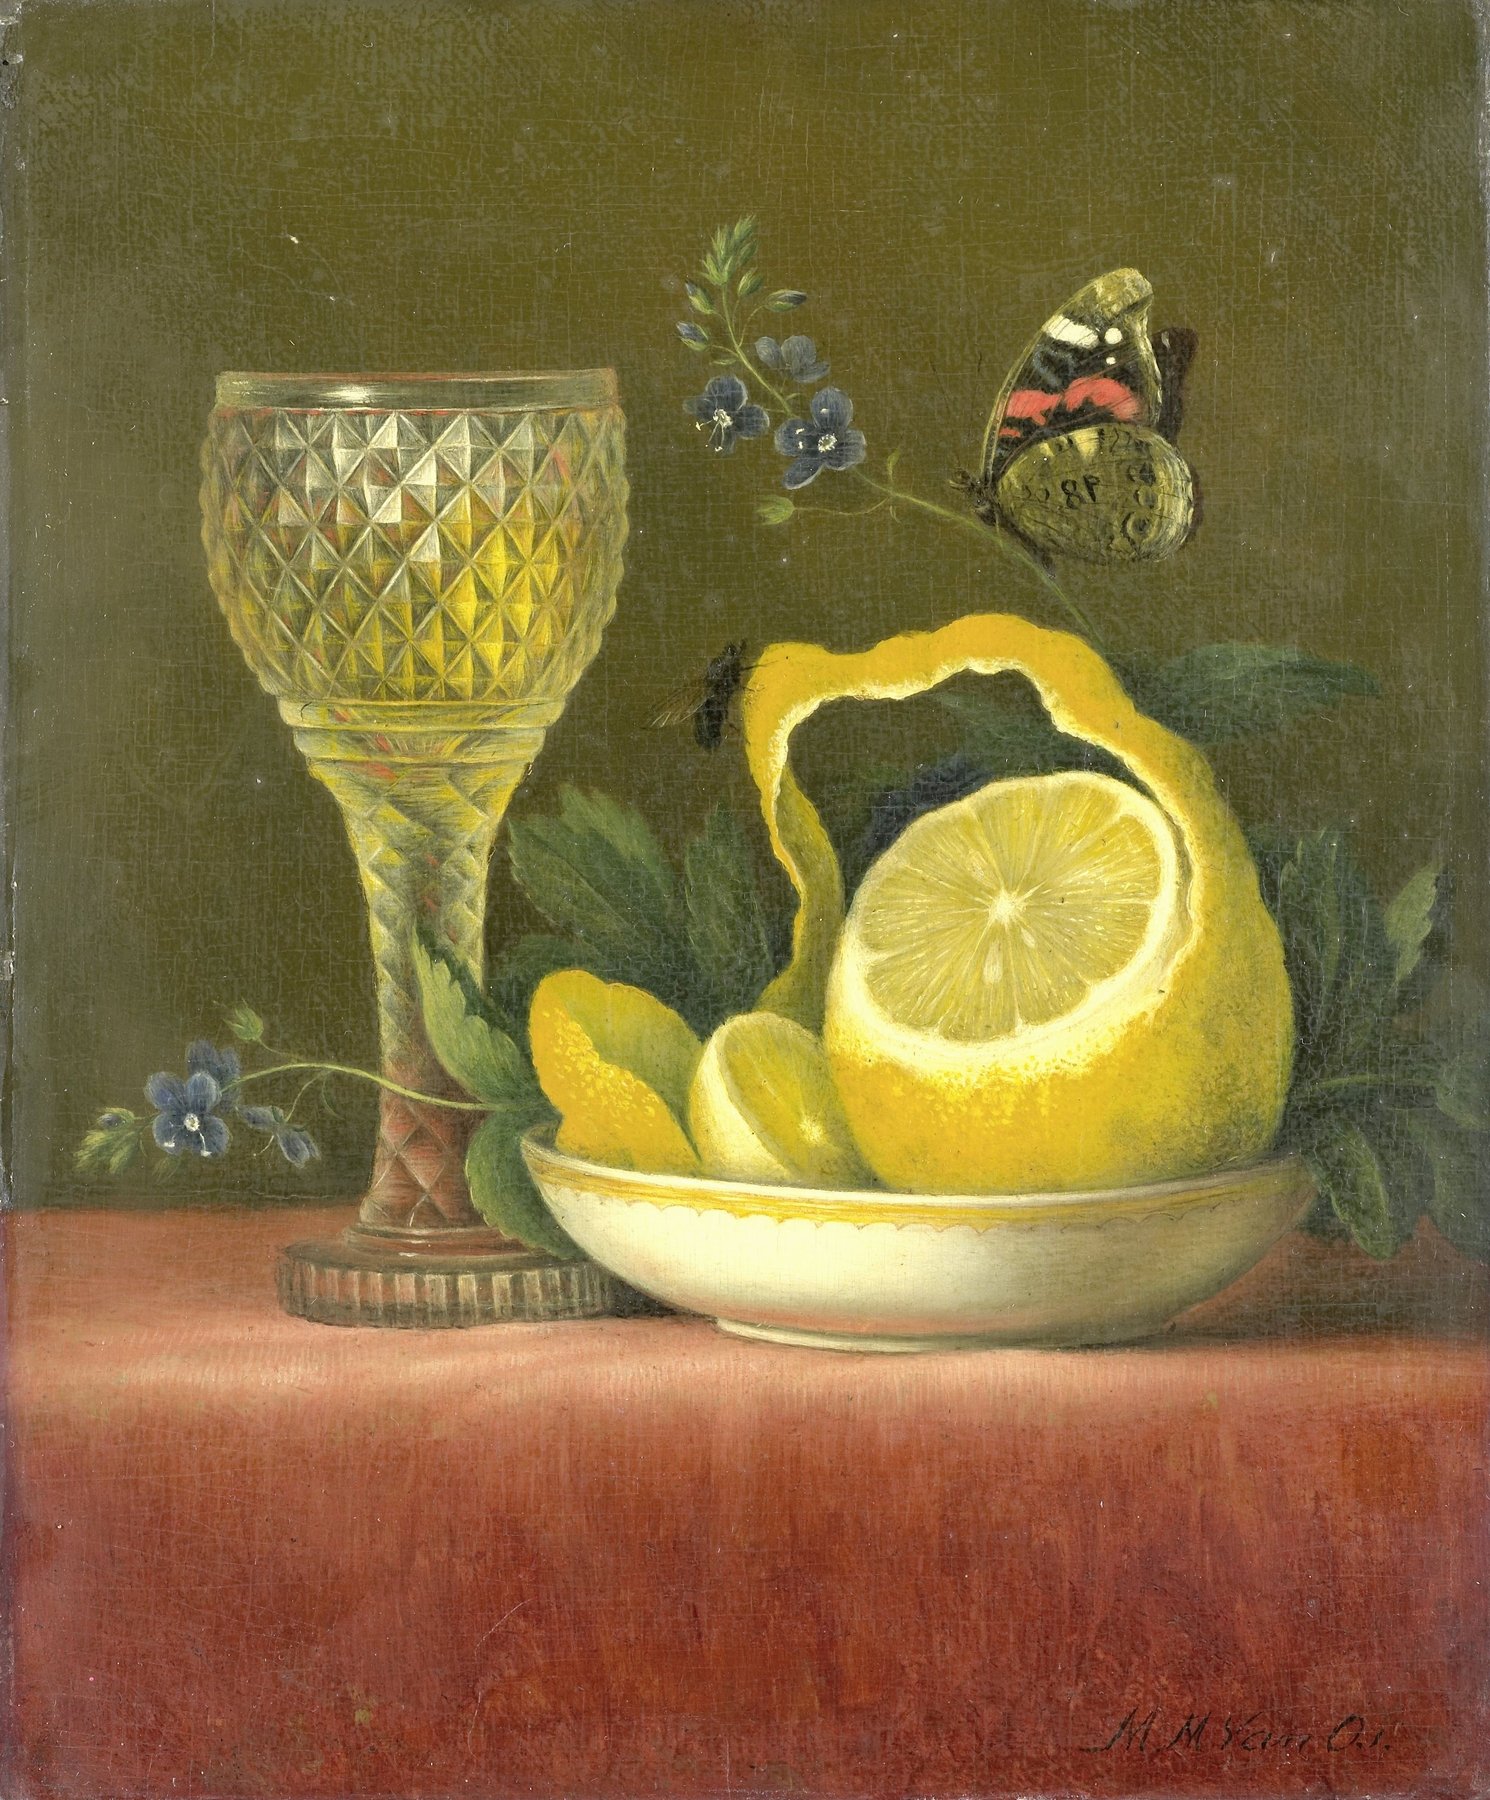 A painting of a half-peeled lemon next to a cut glass and a butterfly